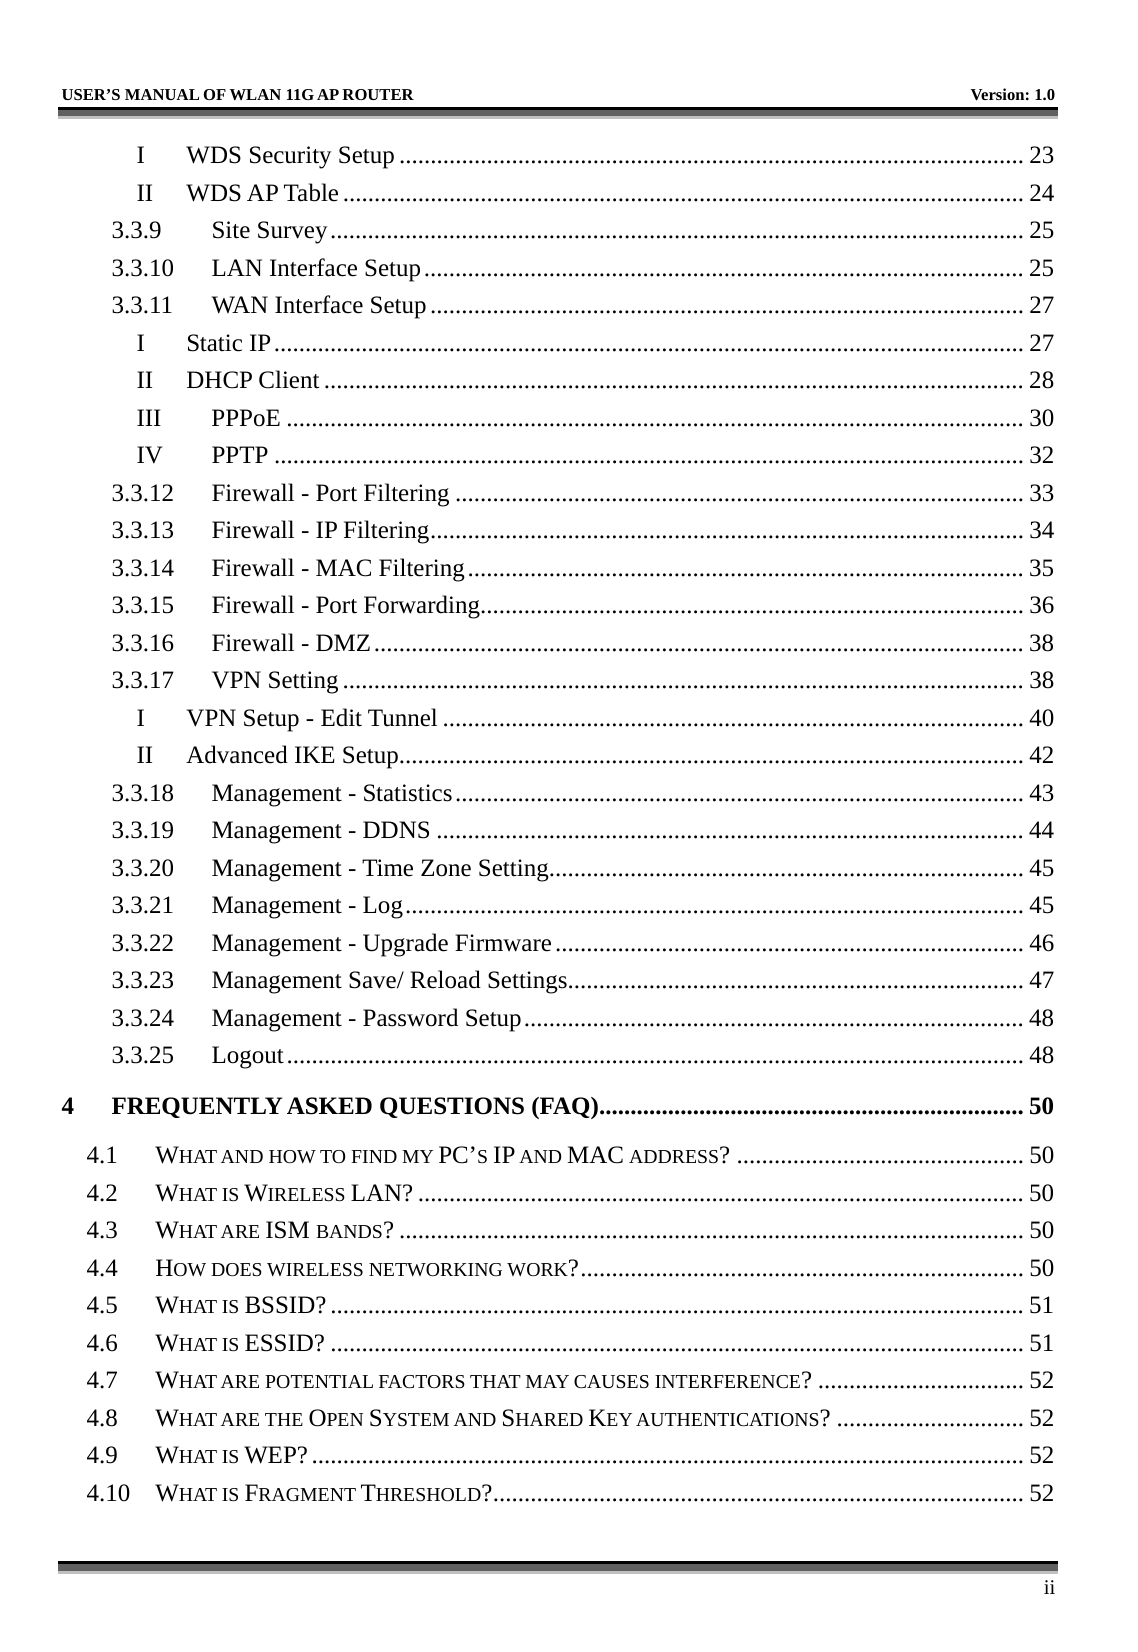   USER’S MANUAL OF WLAN 11G AP ROUTER    Version: 1.0     ii I WDS Security Setup .................................................................................................... 23 II WDS AP Table............................................................................................................. 24 3.3.9 Site Survey............................................................................................................... 25 3.3.10  LAN Interface Setup................................................................................................ 25 3.3.11  WAN Interface Setup............................................................................................... 27 I Static IP........................................................................................................................ 27 II DHCP Client ................................................................................................................ 28 III PPPoE ...................................................................................................................... 30 IV PPTP ........................................................................................................................ 32 3.3.12  Firewall - Port Filtering ........................................................................................... 33 3.3.13  Firewall - IP Filtering............................................................................................... 34 3.3.14  Firewall - MAC Filtering......................................................................................... 35 3.3.15  Firewall - Port Forwarding....................................................................................... 36 3.3.16  Firewall - DMZ........................................................................................................ 38 3.3.17 VPN Setting ............................................................................................................. 38 I  VPN Setup - Edit Tunnel ............................................................................................. 40 II  Advanced IKE Setup.................................................................................................... 42 3.3.18  Management - Statistics........................................................................................... 43 3.3.19  Management - DDNS .............................................................................................. 44 3.3.20  Management - Time Zone Setting............................................................................ 45 3.3.21  Management - Log................................................................................................... 45 3.3.22  Management - Upgrade Firmware........................................................................... 46 3.3.23  Management Save/ Reload Settings......................................................................... 47 3.3.24  Management - Password Setup................................................................................ 48 3.3.25 Logout...................................................................................................................... 48 4 FREQUENTLY ASKED QUESTIONS (FAQ).................................................................... 50 4.1 WHAT AND HOW TO FIND MY PC’S IP AND MAC ADDRESS? .............................................. 50 4.2 WHAT IS WIRELESS LAN? ................................................................................................. 50 4.3 WHAT ARE ISM BANDS? .................................................................................................... 50 4.4 HOW DOES WIRELESS NETWORKING WORK?....................................................................... 50 4.5 WHAT IS BSSID?............................................................................................................... 51 4.6 WHAT IS ESSID? ............................................................................................................... 51 4.7 WHAT ARE POTENTIAL FACTORS THAT MAY CAUSES INTERFERENCE? ................................. 52 4.8 WHAT ARE THE OPEN SYSTEM AND SHARED KEY AUTHENTICATIONS? .............................. 52 4.9 WHAT IS WEP?.................................................................................................................. 52 4.10 WHAT IS FRAGMENT THRESHOLD?..................................................................................... 52 